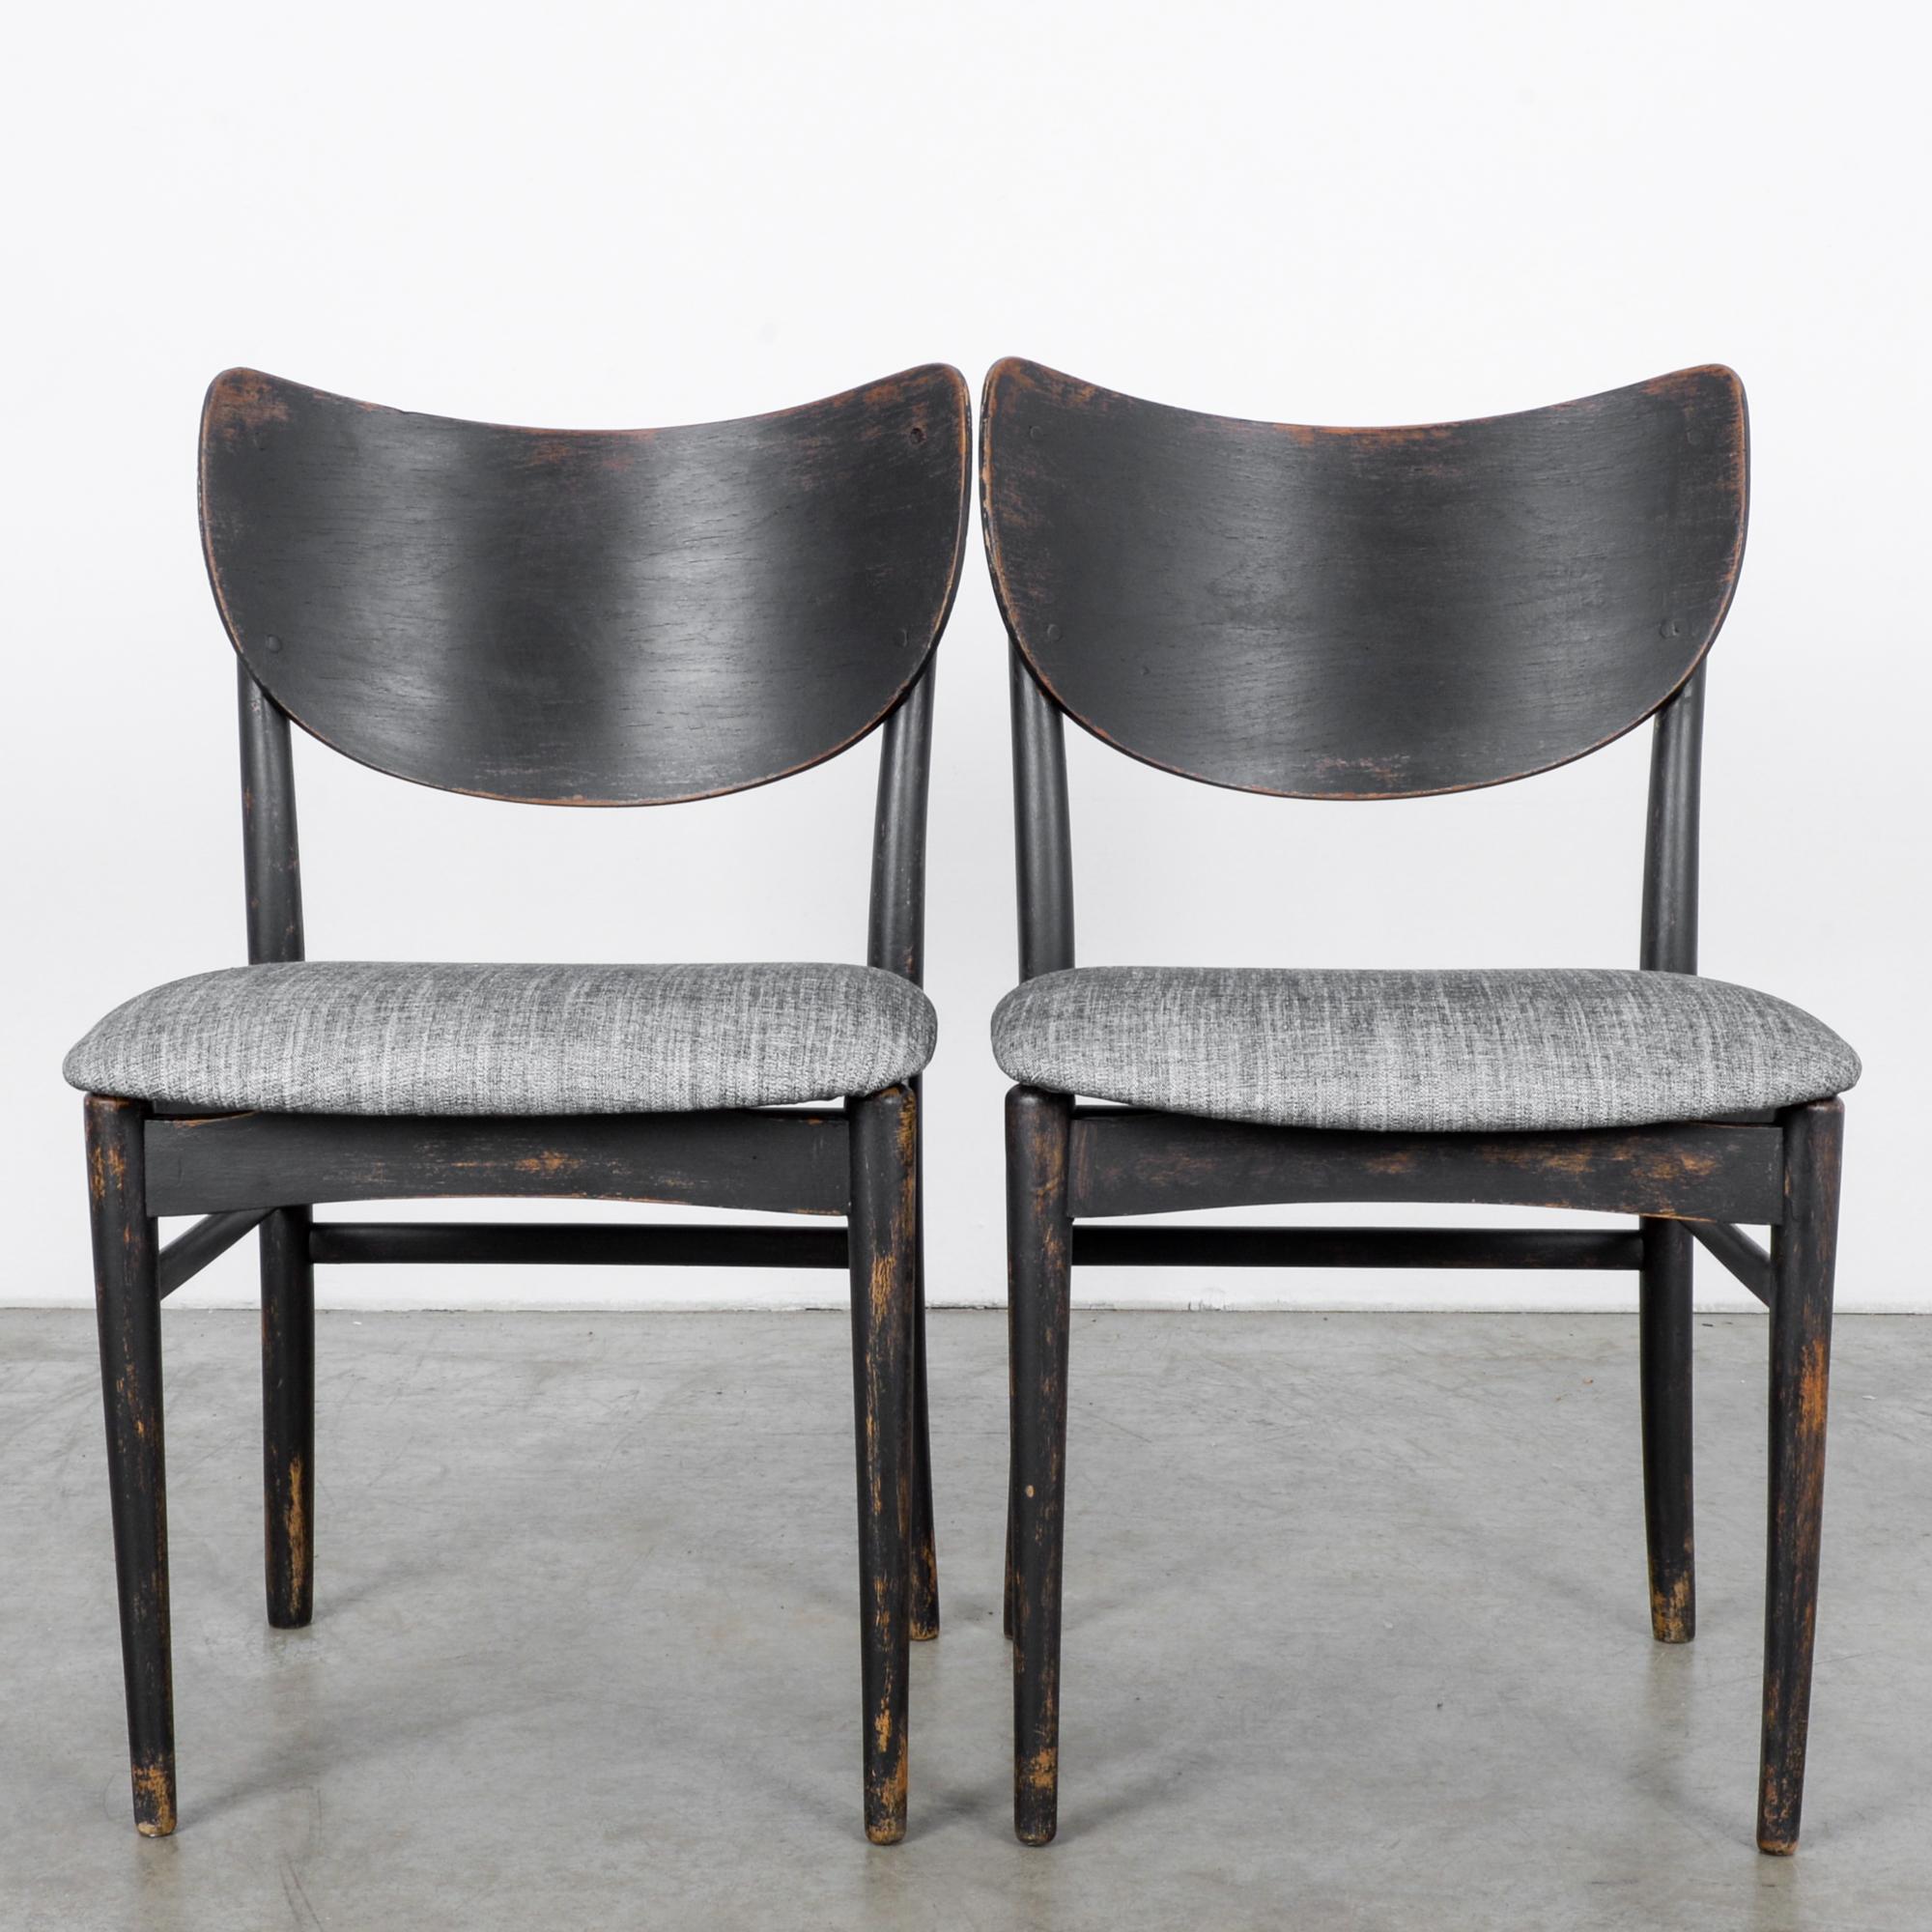 This pair of wooden chairs with newly upholstered gray seats was made in Denmark, circa 1950. The black frames display a beautifully worn patina, hinting at the warm tones of the wood. With the elegantly curved backrests and angled rear posts, these